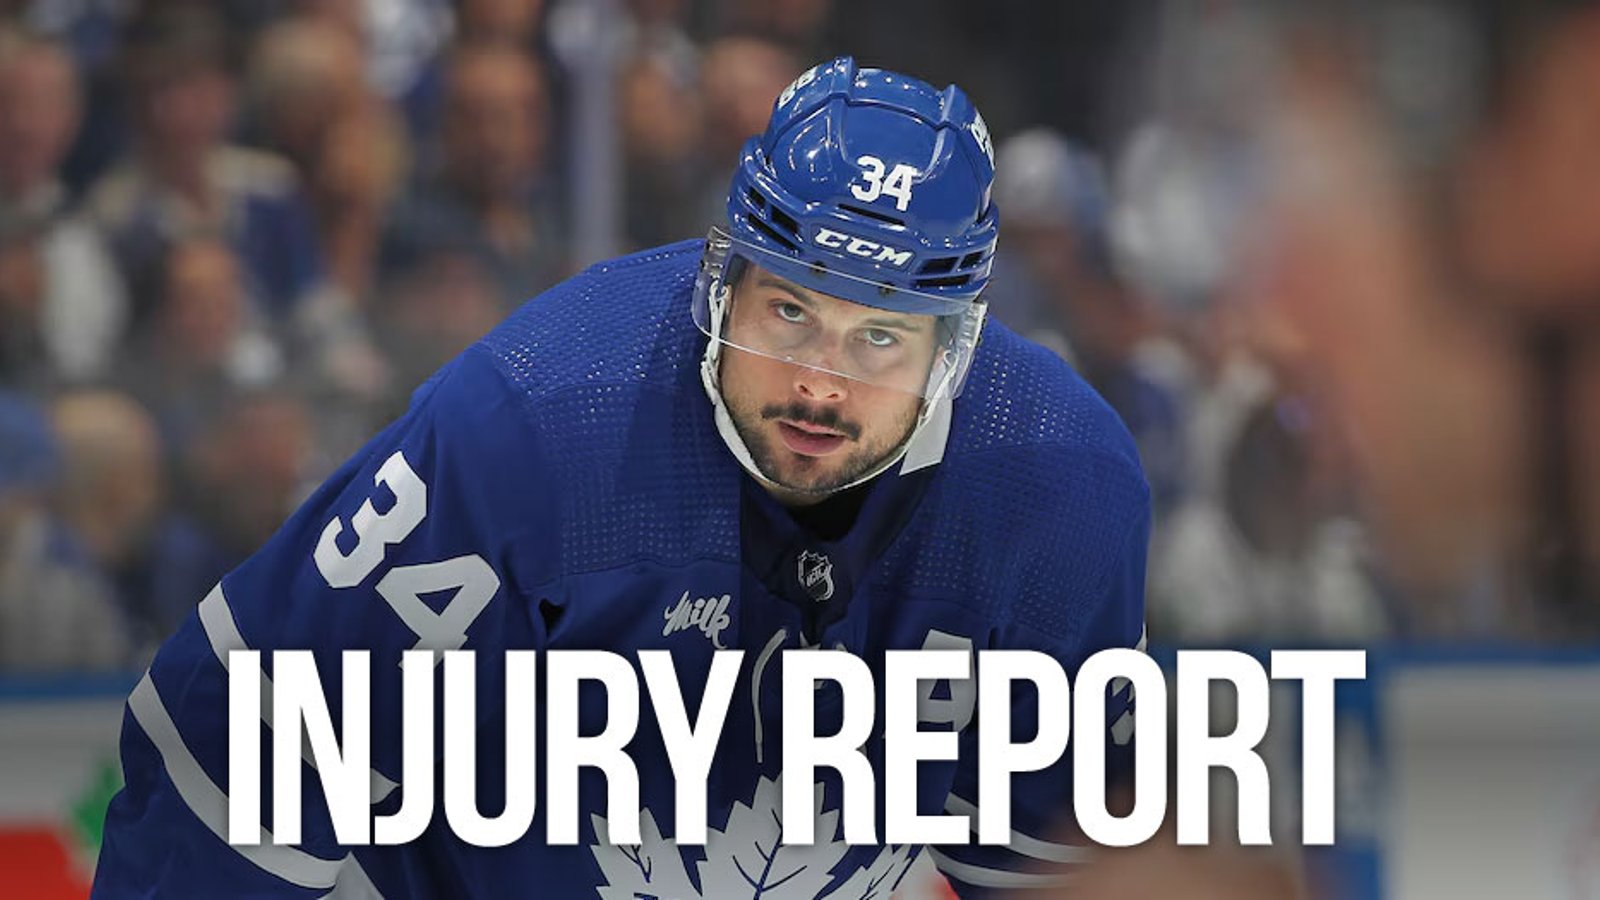 Reports that Auston Matthews may be out with a concussion